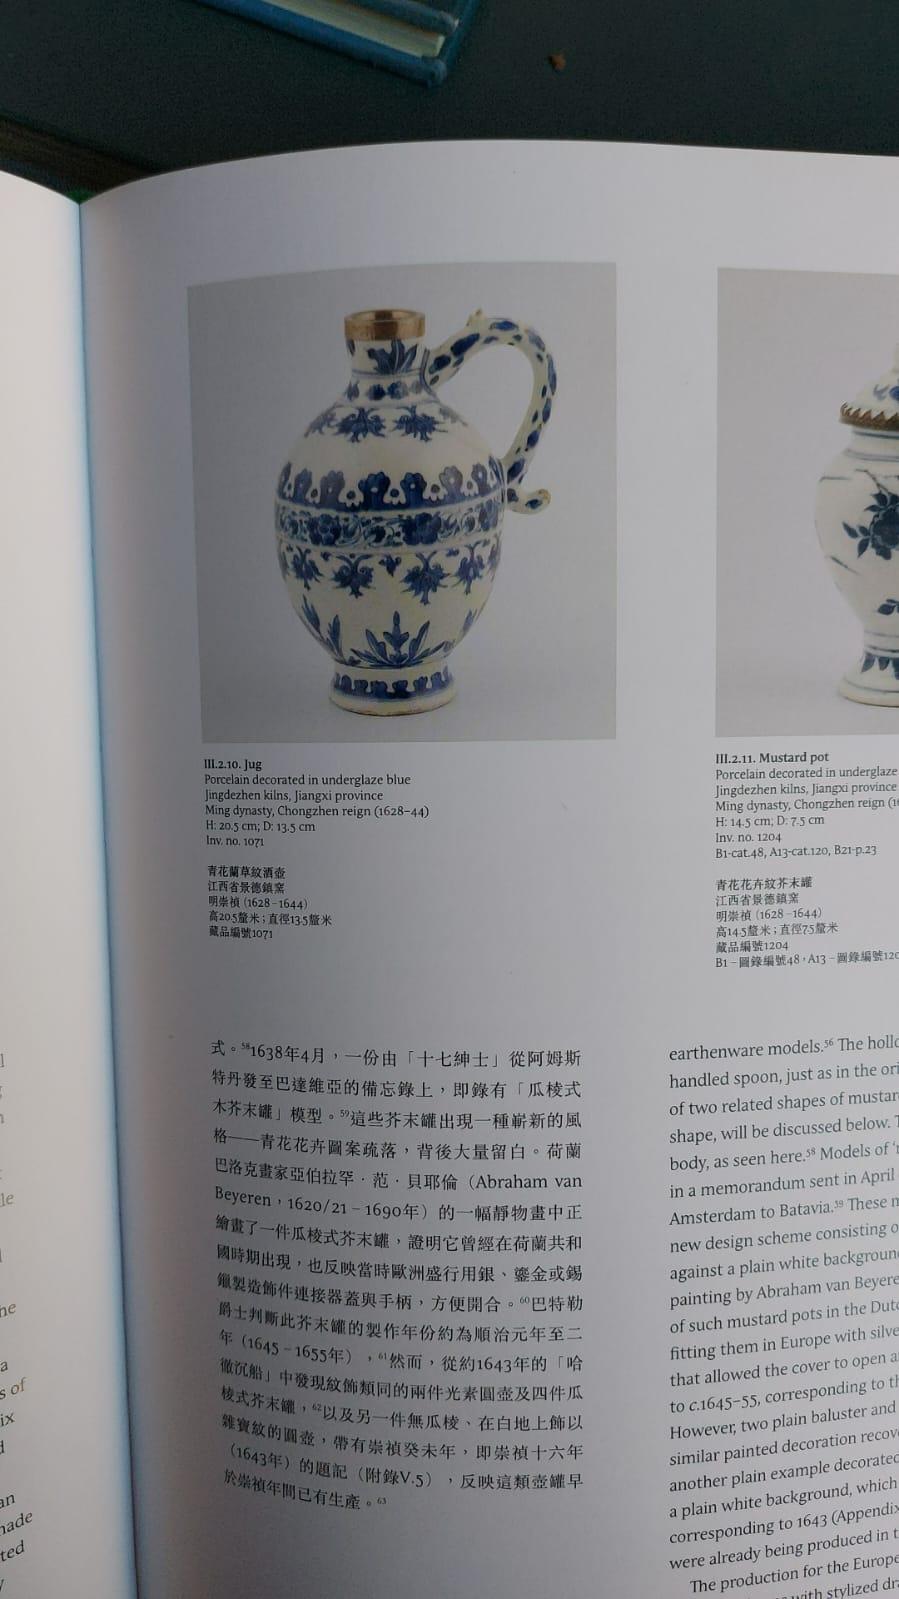 Description

A very nicely decorated Ewer in underglaze blue.

Probably Chongzhen Period 1624 – 1644

Reference: Canepa & Butler: Leaping the Dragon, see pictures for a similar piece.

Condition
Kintsugi repair to neck with line running